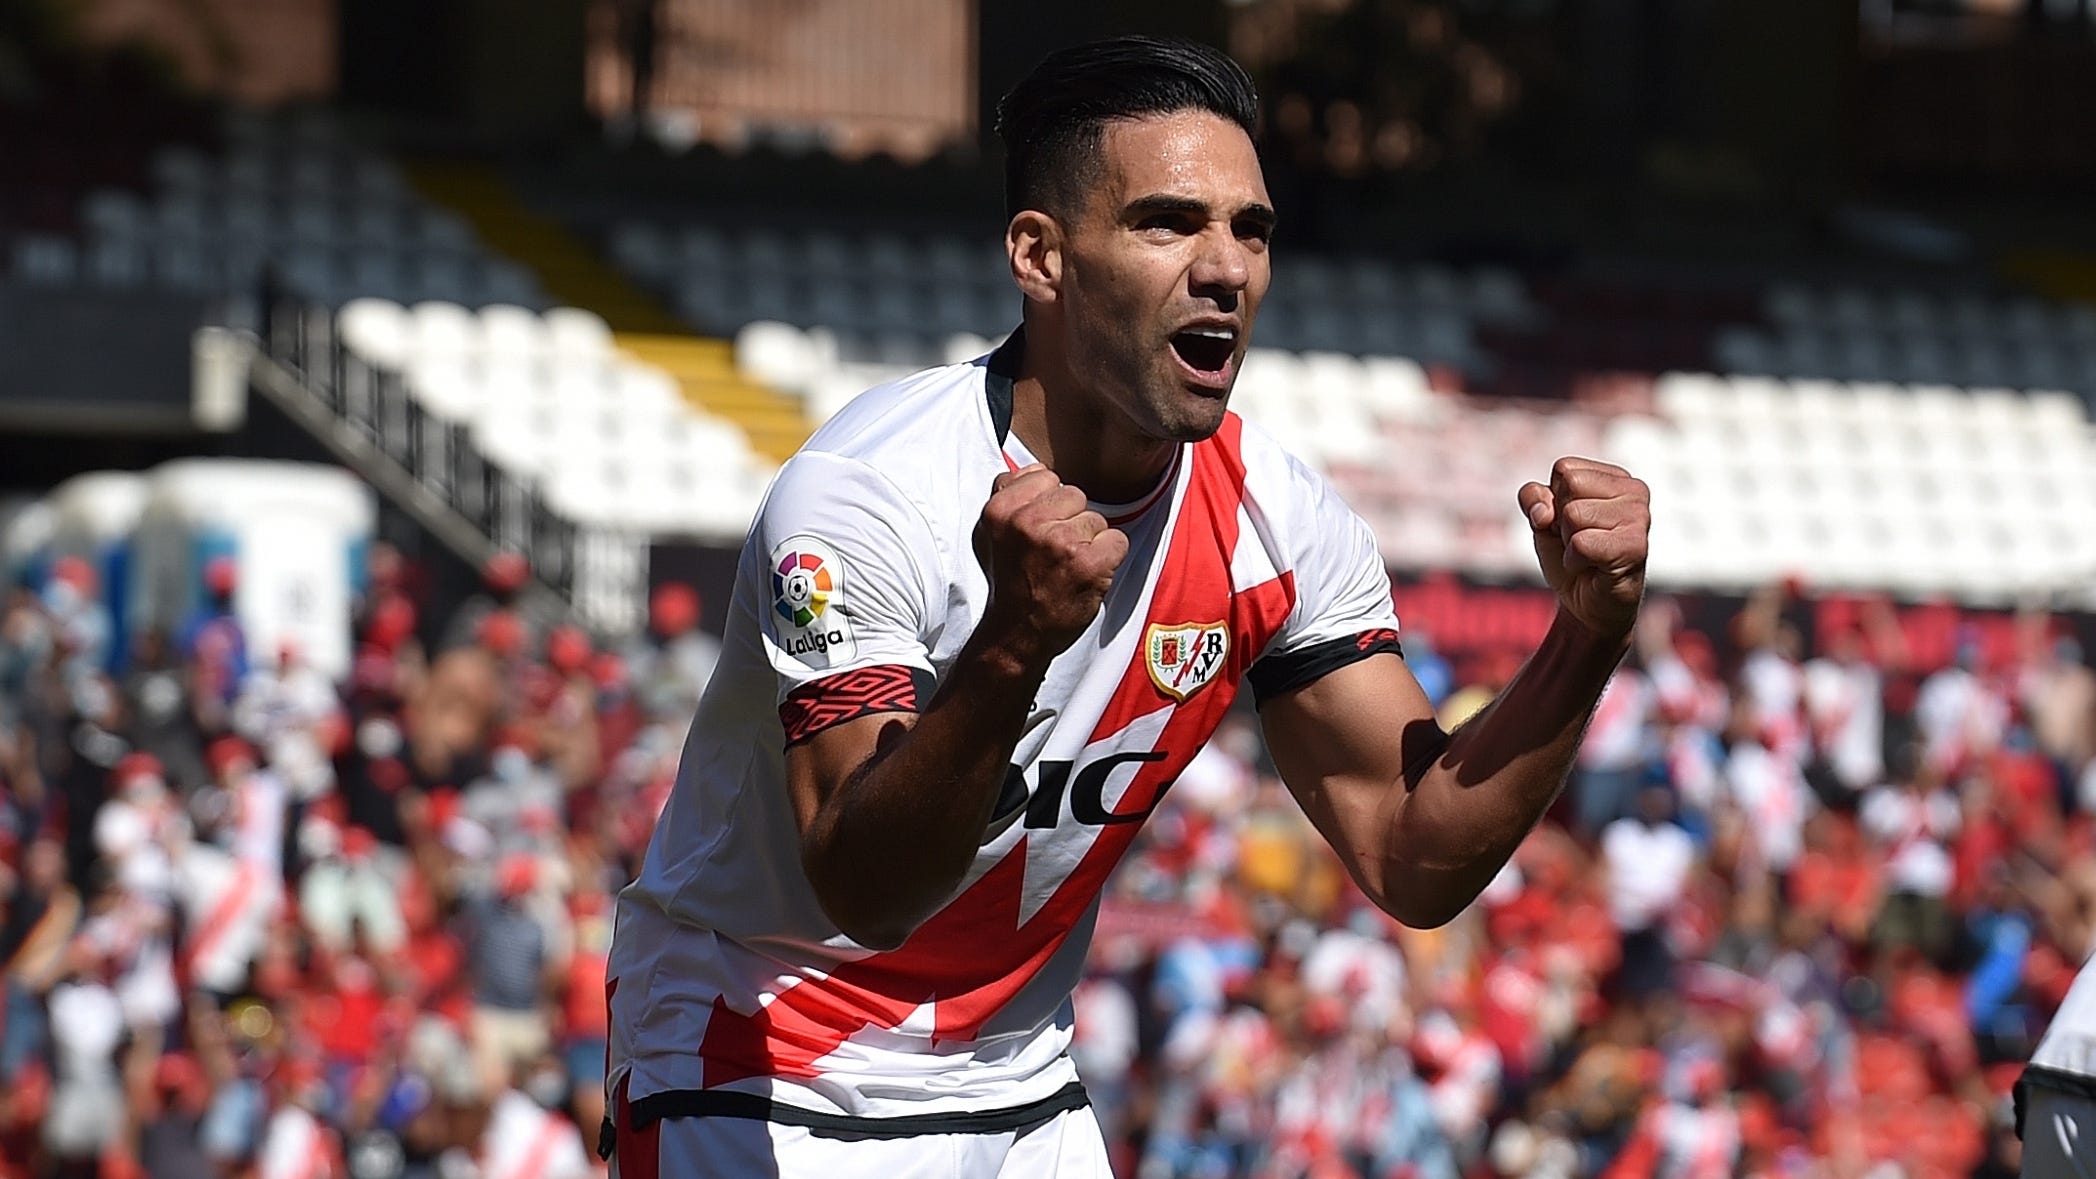 We doubled the tickets to attend the Athletic – Rayo fixture